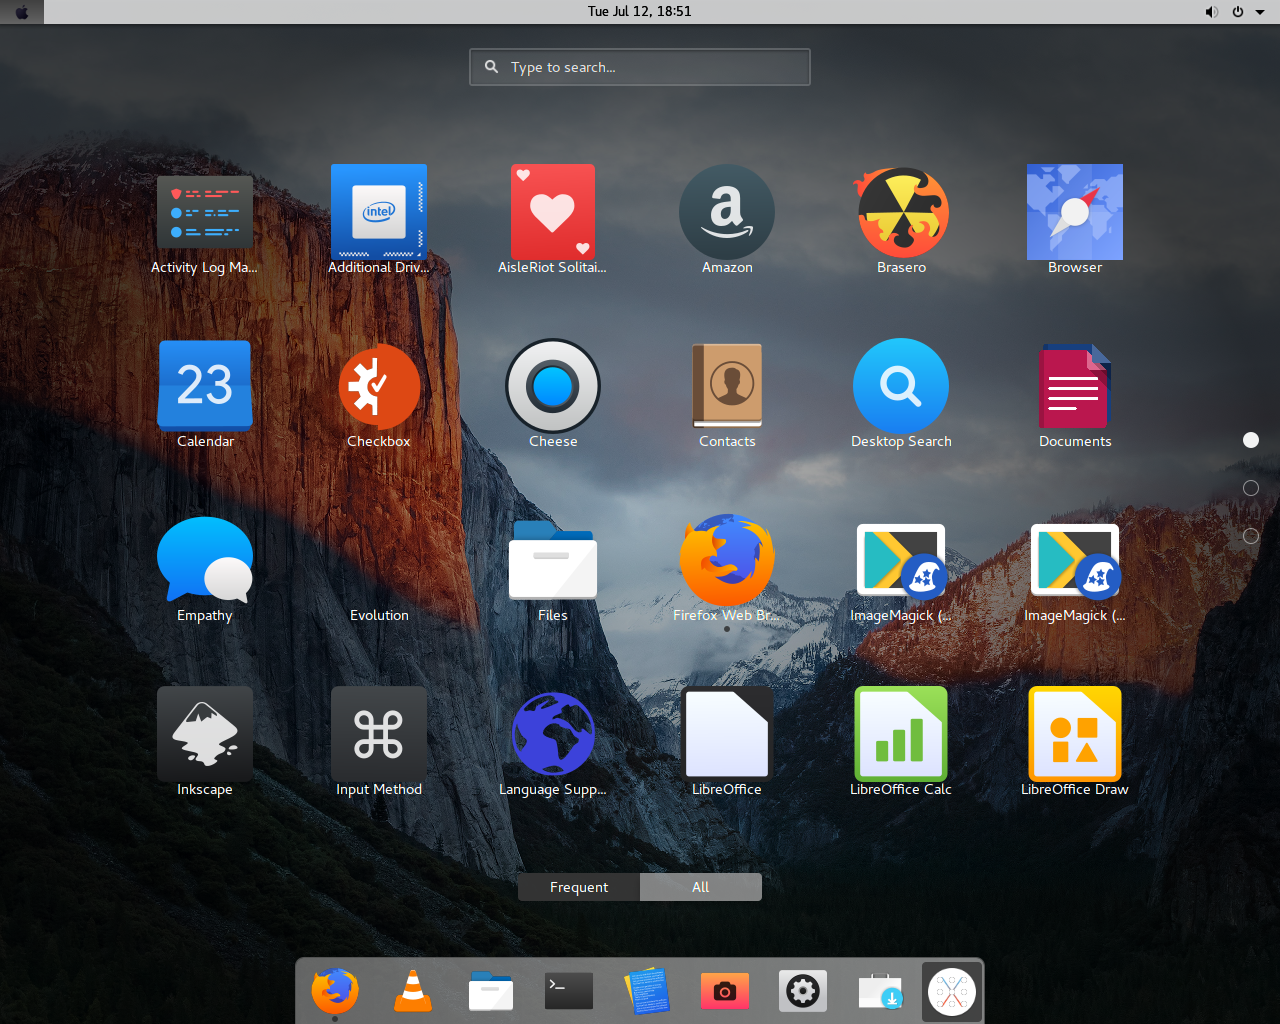 download os 9 theme for osx